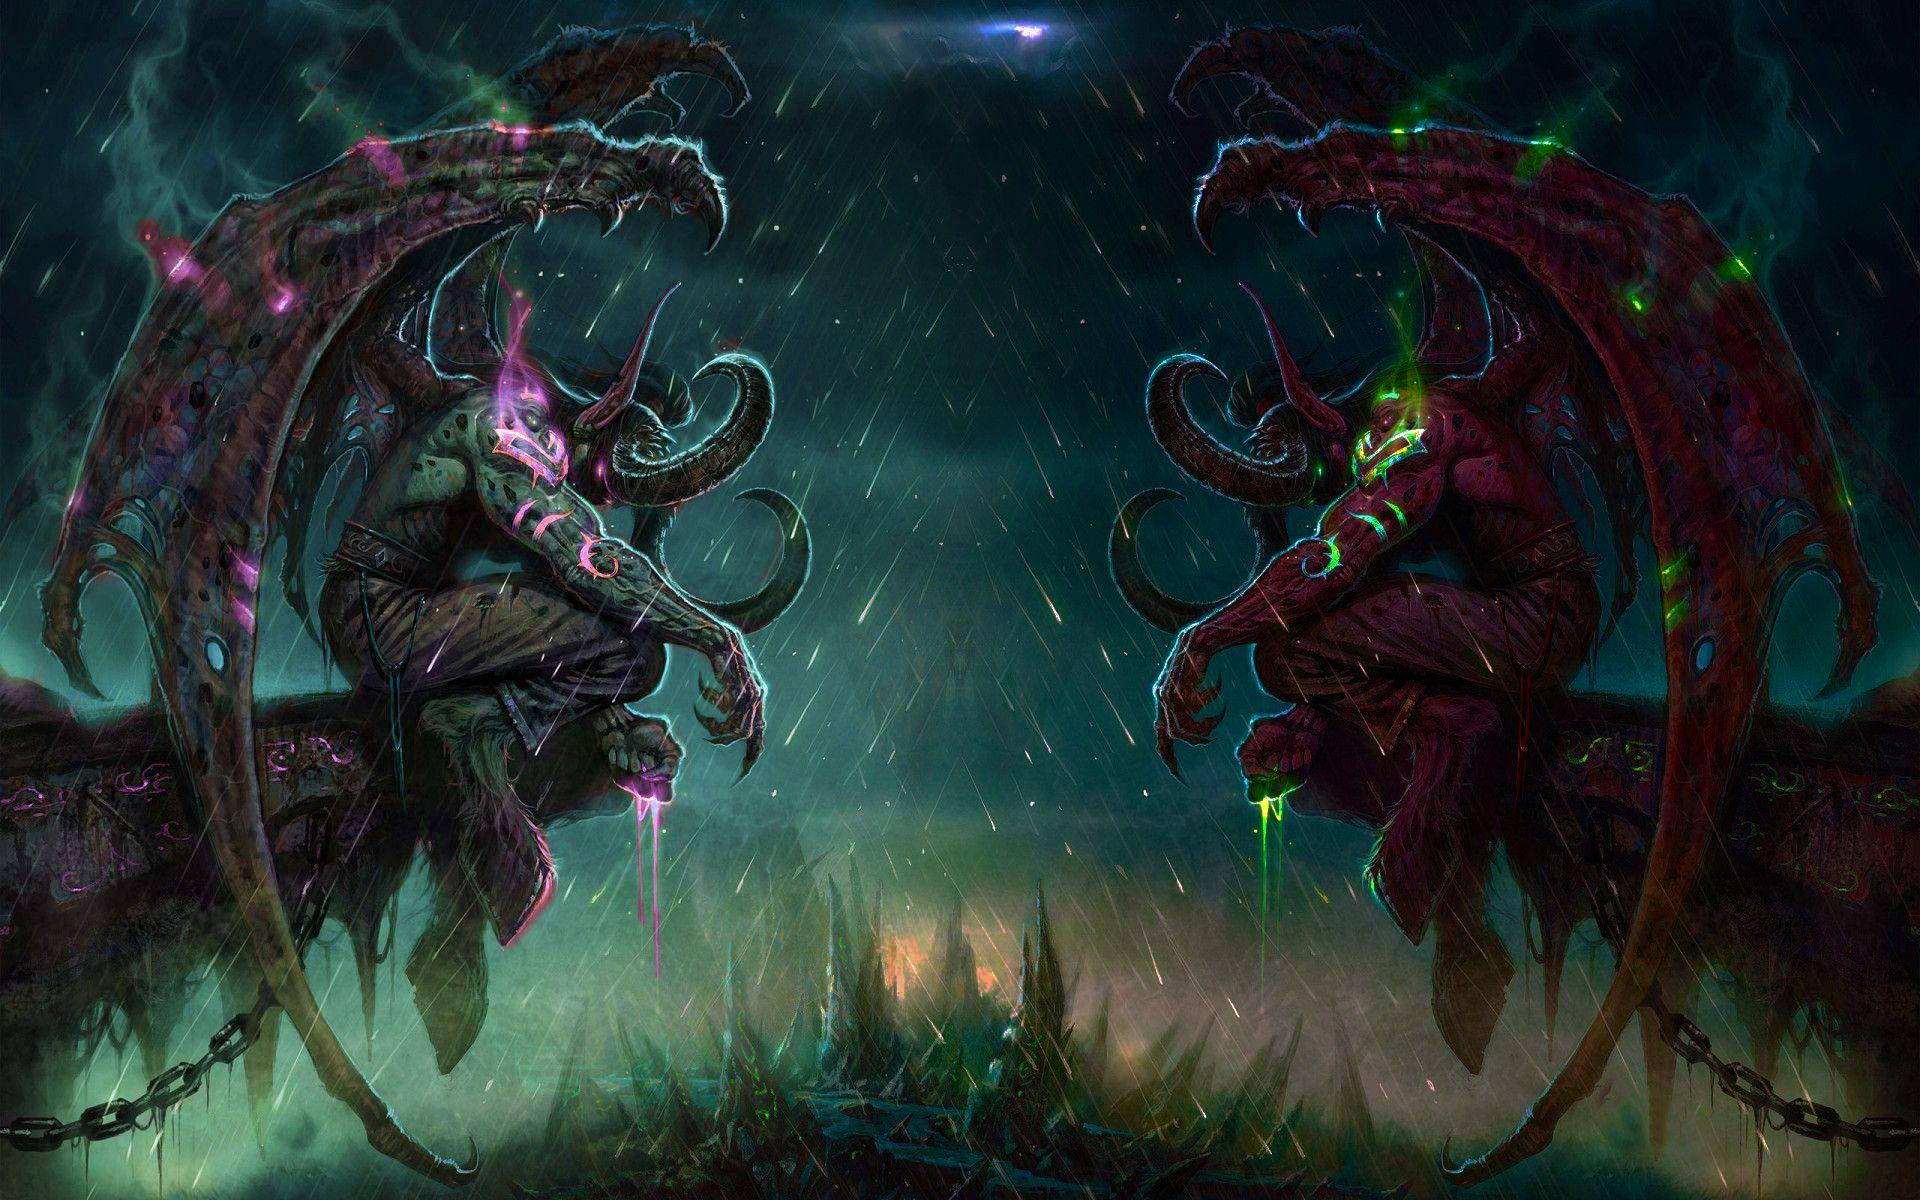 World of Warcraft Dual Monitor Wallpapers - Top Free World of Warcraft